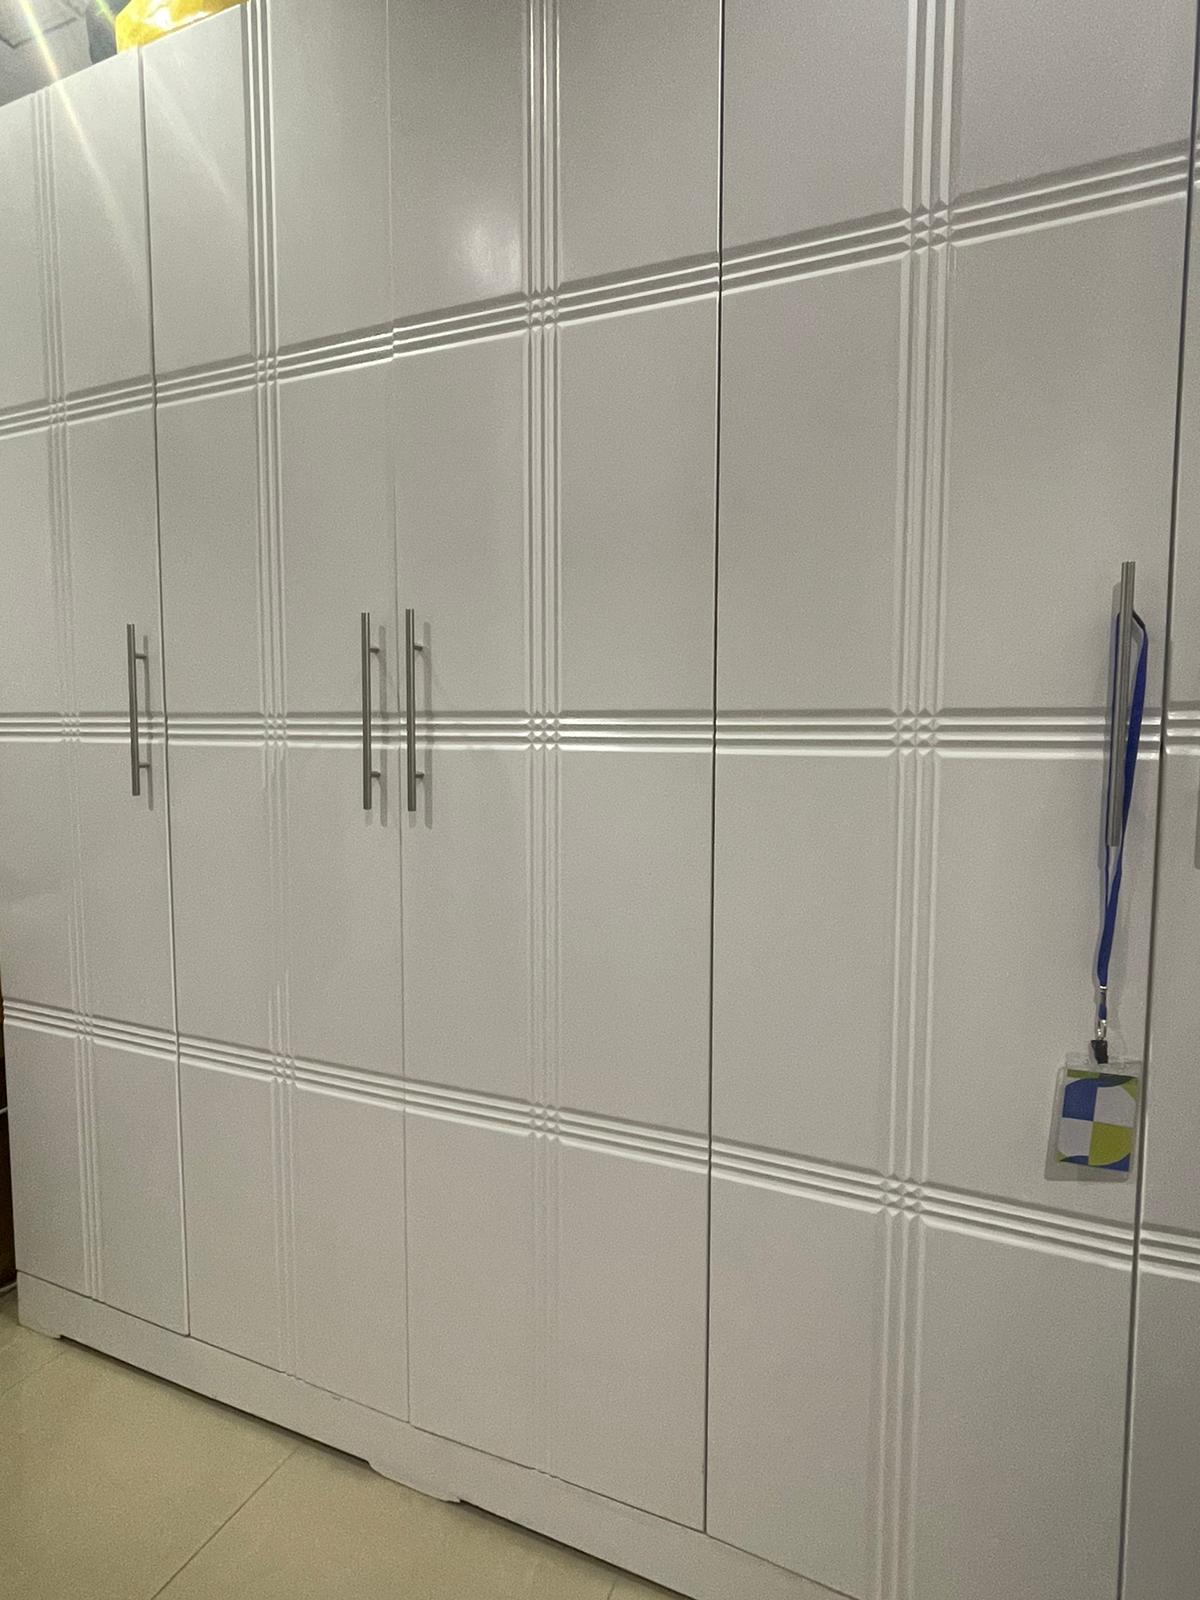 6 DOOR WARDROBE / BOTTOM KITCHEN CABINETS FOR SALE- USED LIKE NEW